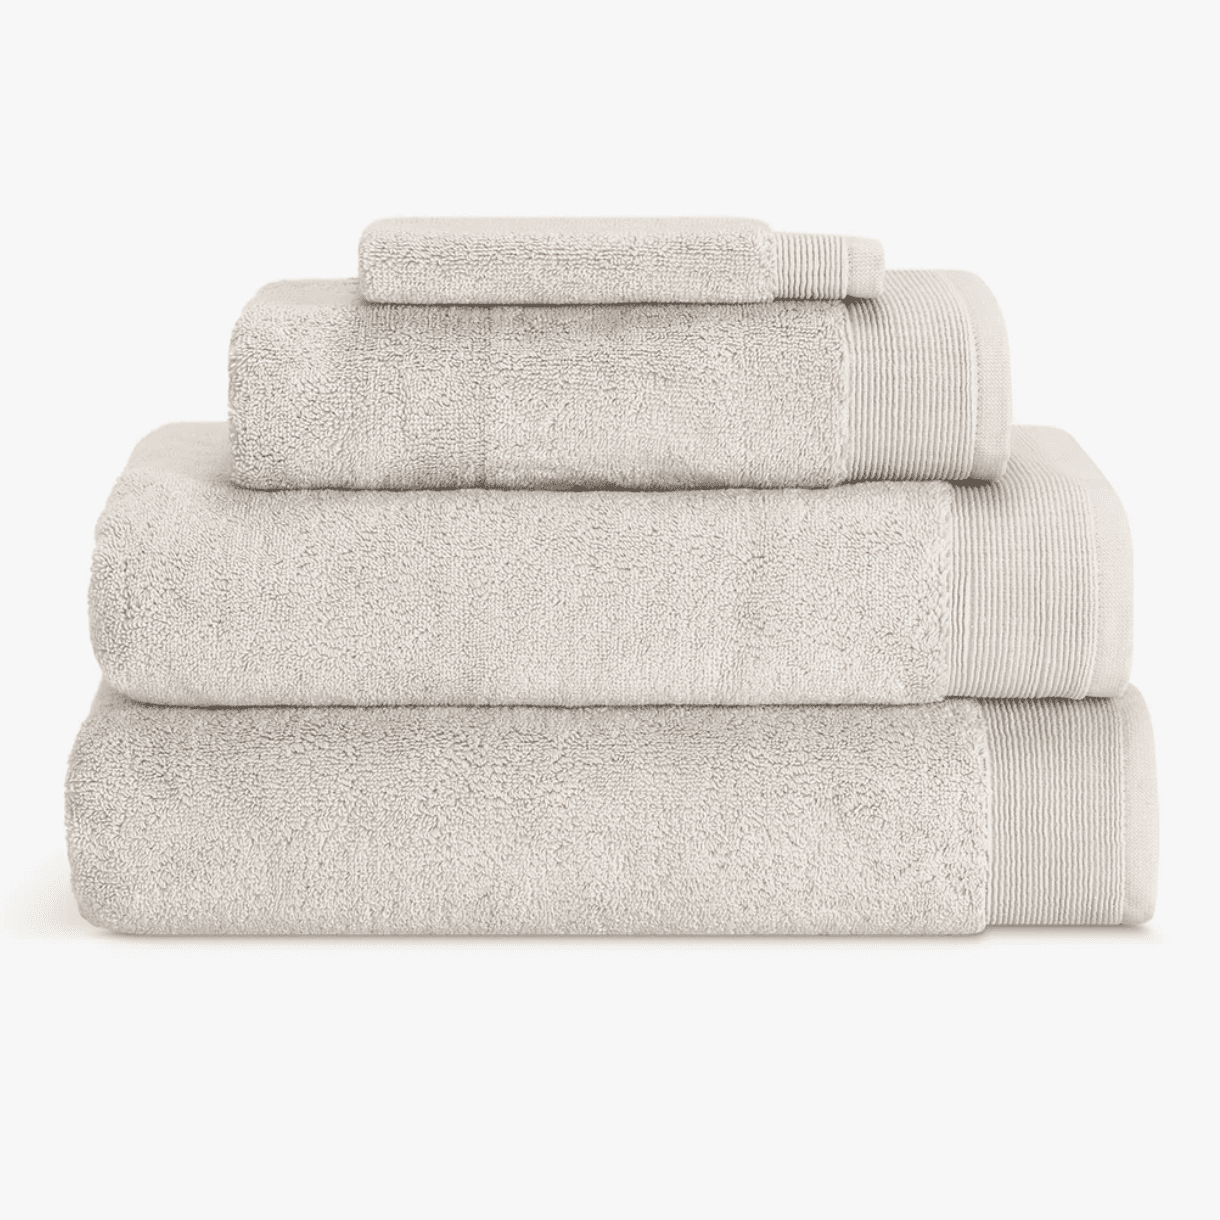 https://cdn.apartmenttherapy.info/image/upload/v1702305794/gen-workflow/product-database/Onsen-Wovey-Plush-Complete-Bath-Towel-Set.png